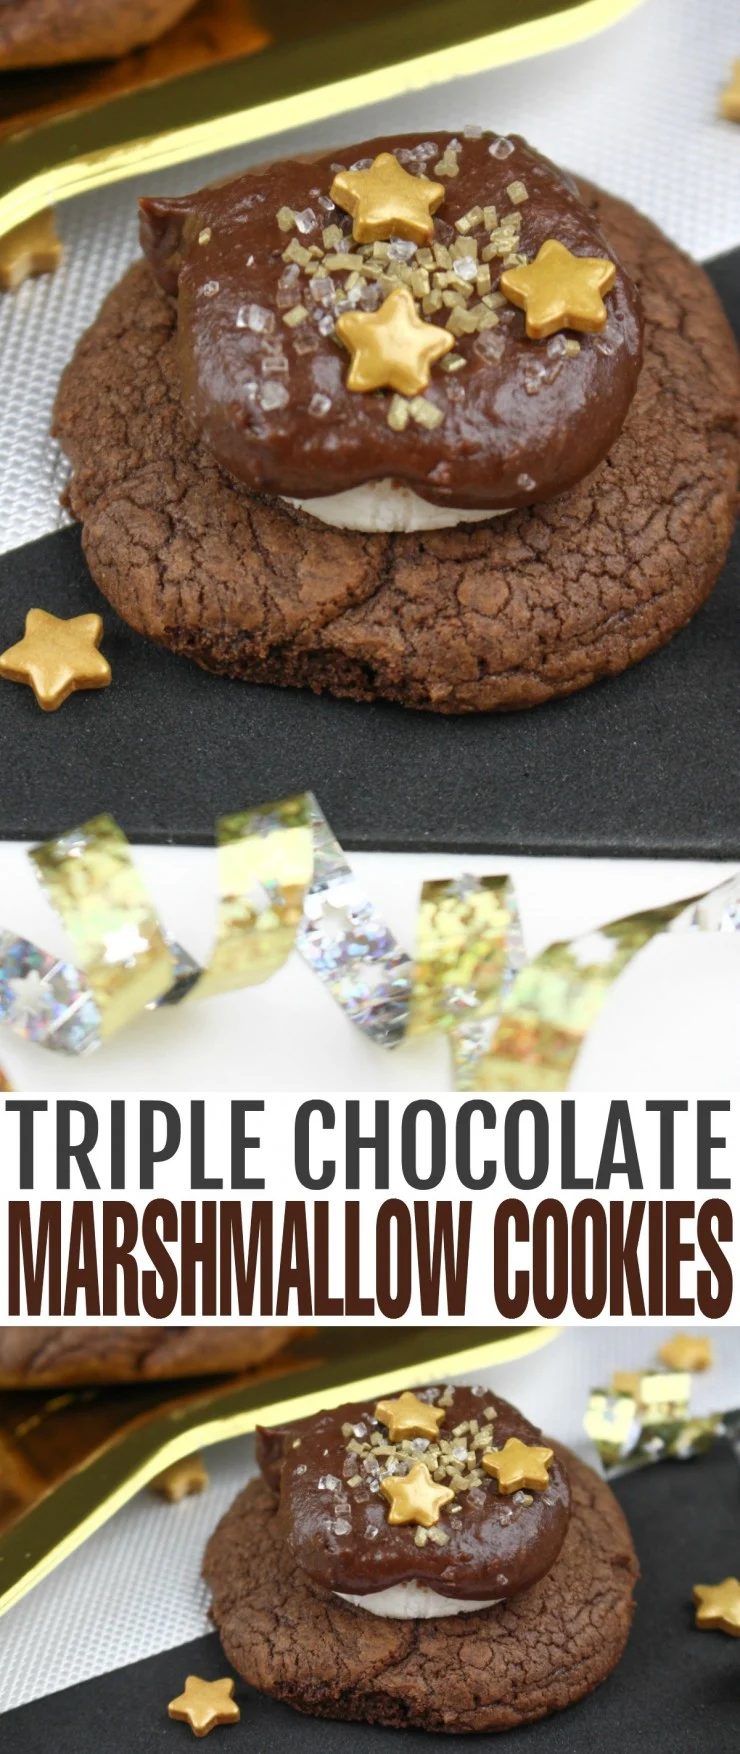 These Triple Chocolate Marshmallow Cookies will satisfy any chocolate craving with their fudgy chocolate cookie base topped with marshmallow smothered in more chocolate. These are any chocolate lovers dream come true!